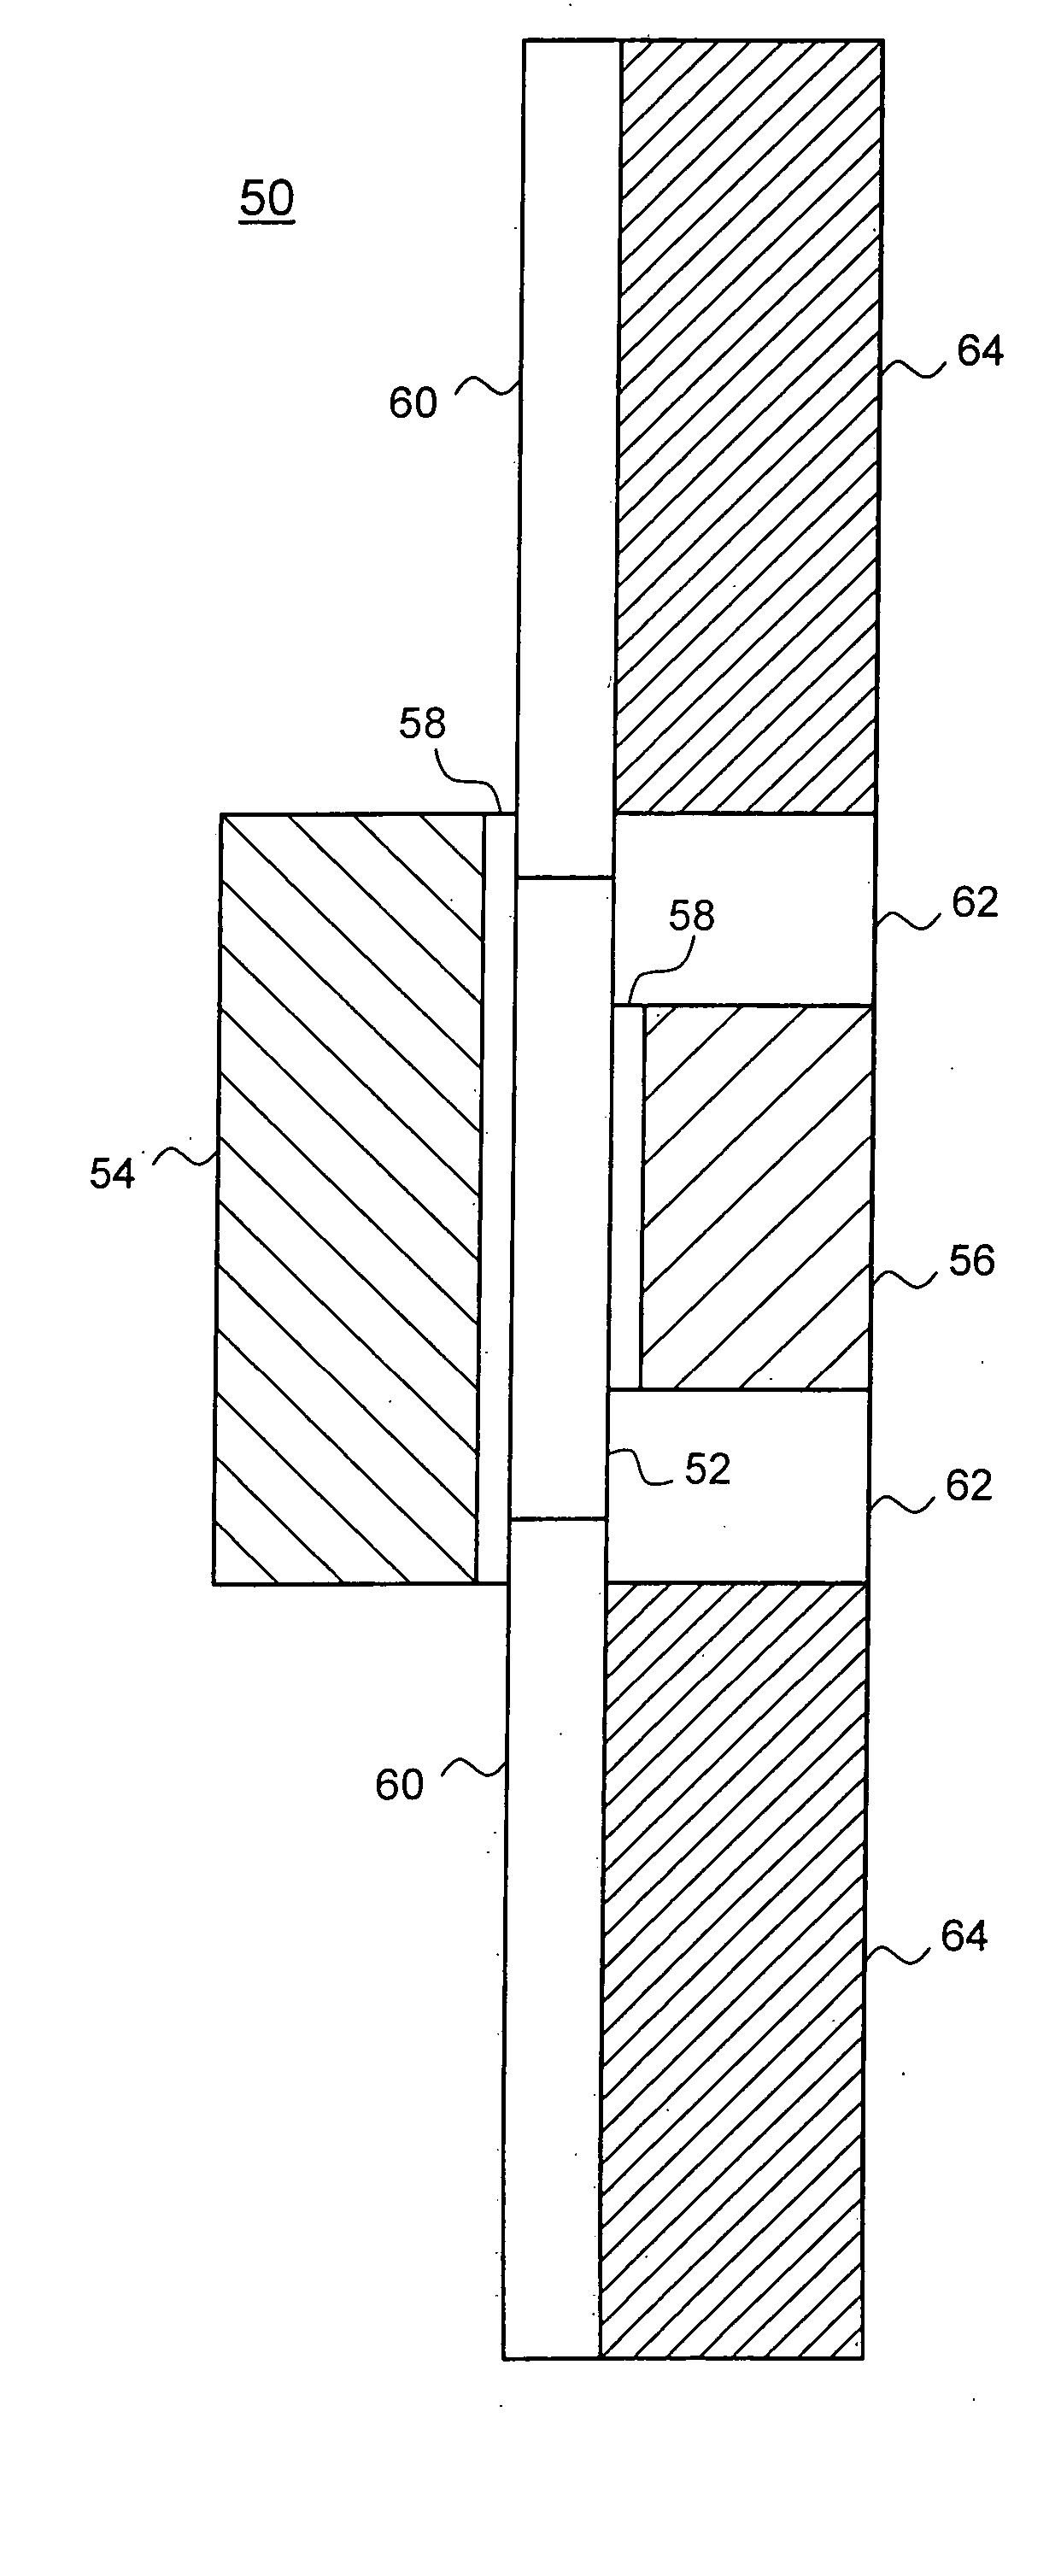 Doubly asymmetric double gate transistor structure